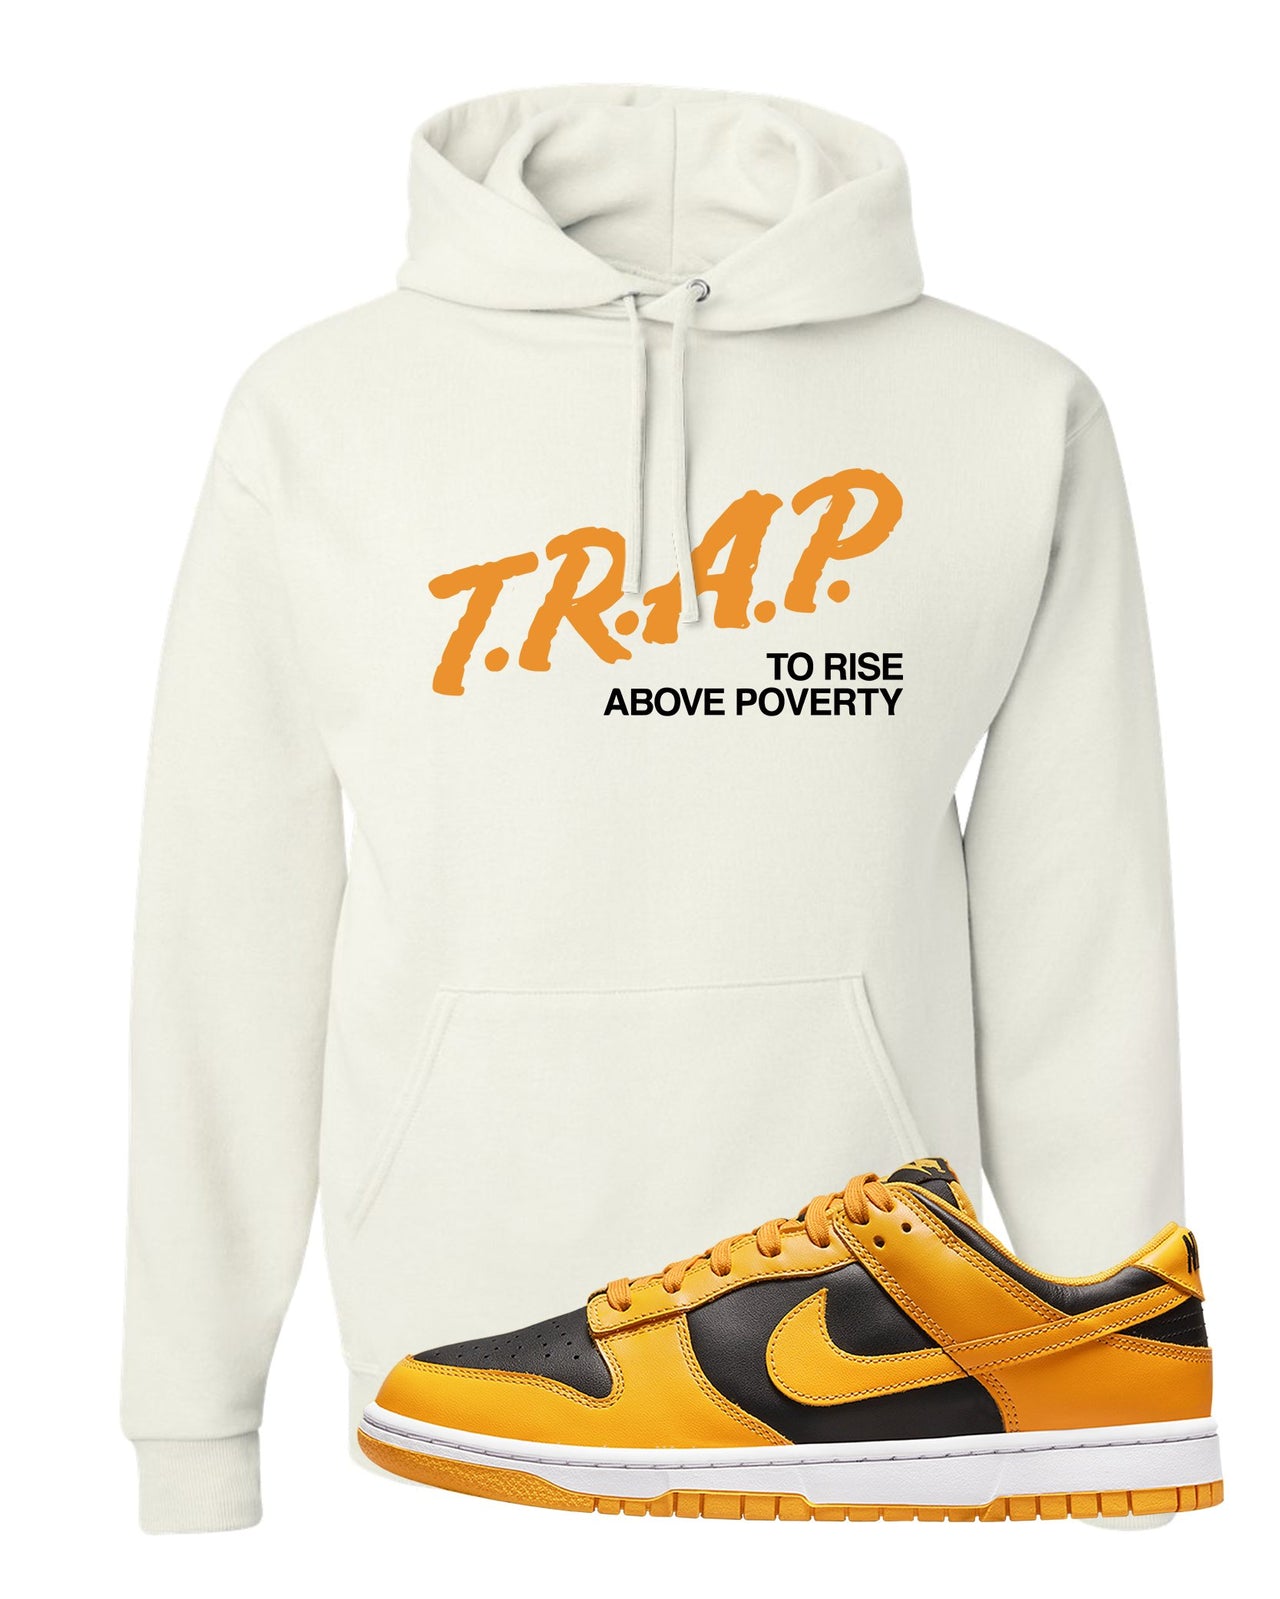 Goldenrod Low Dunks Hoodie | Trap To Rise Above Poverty, White